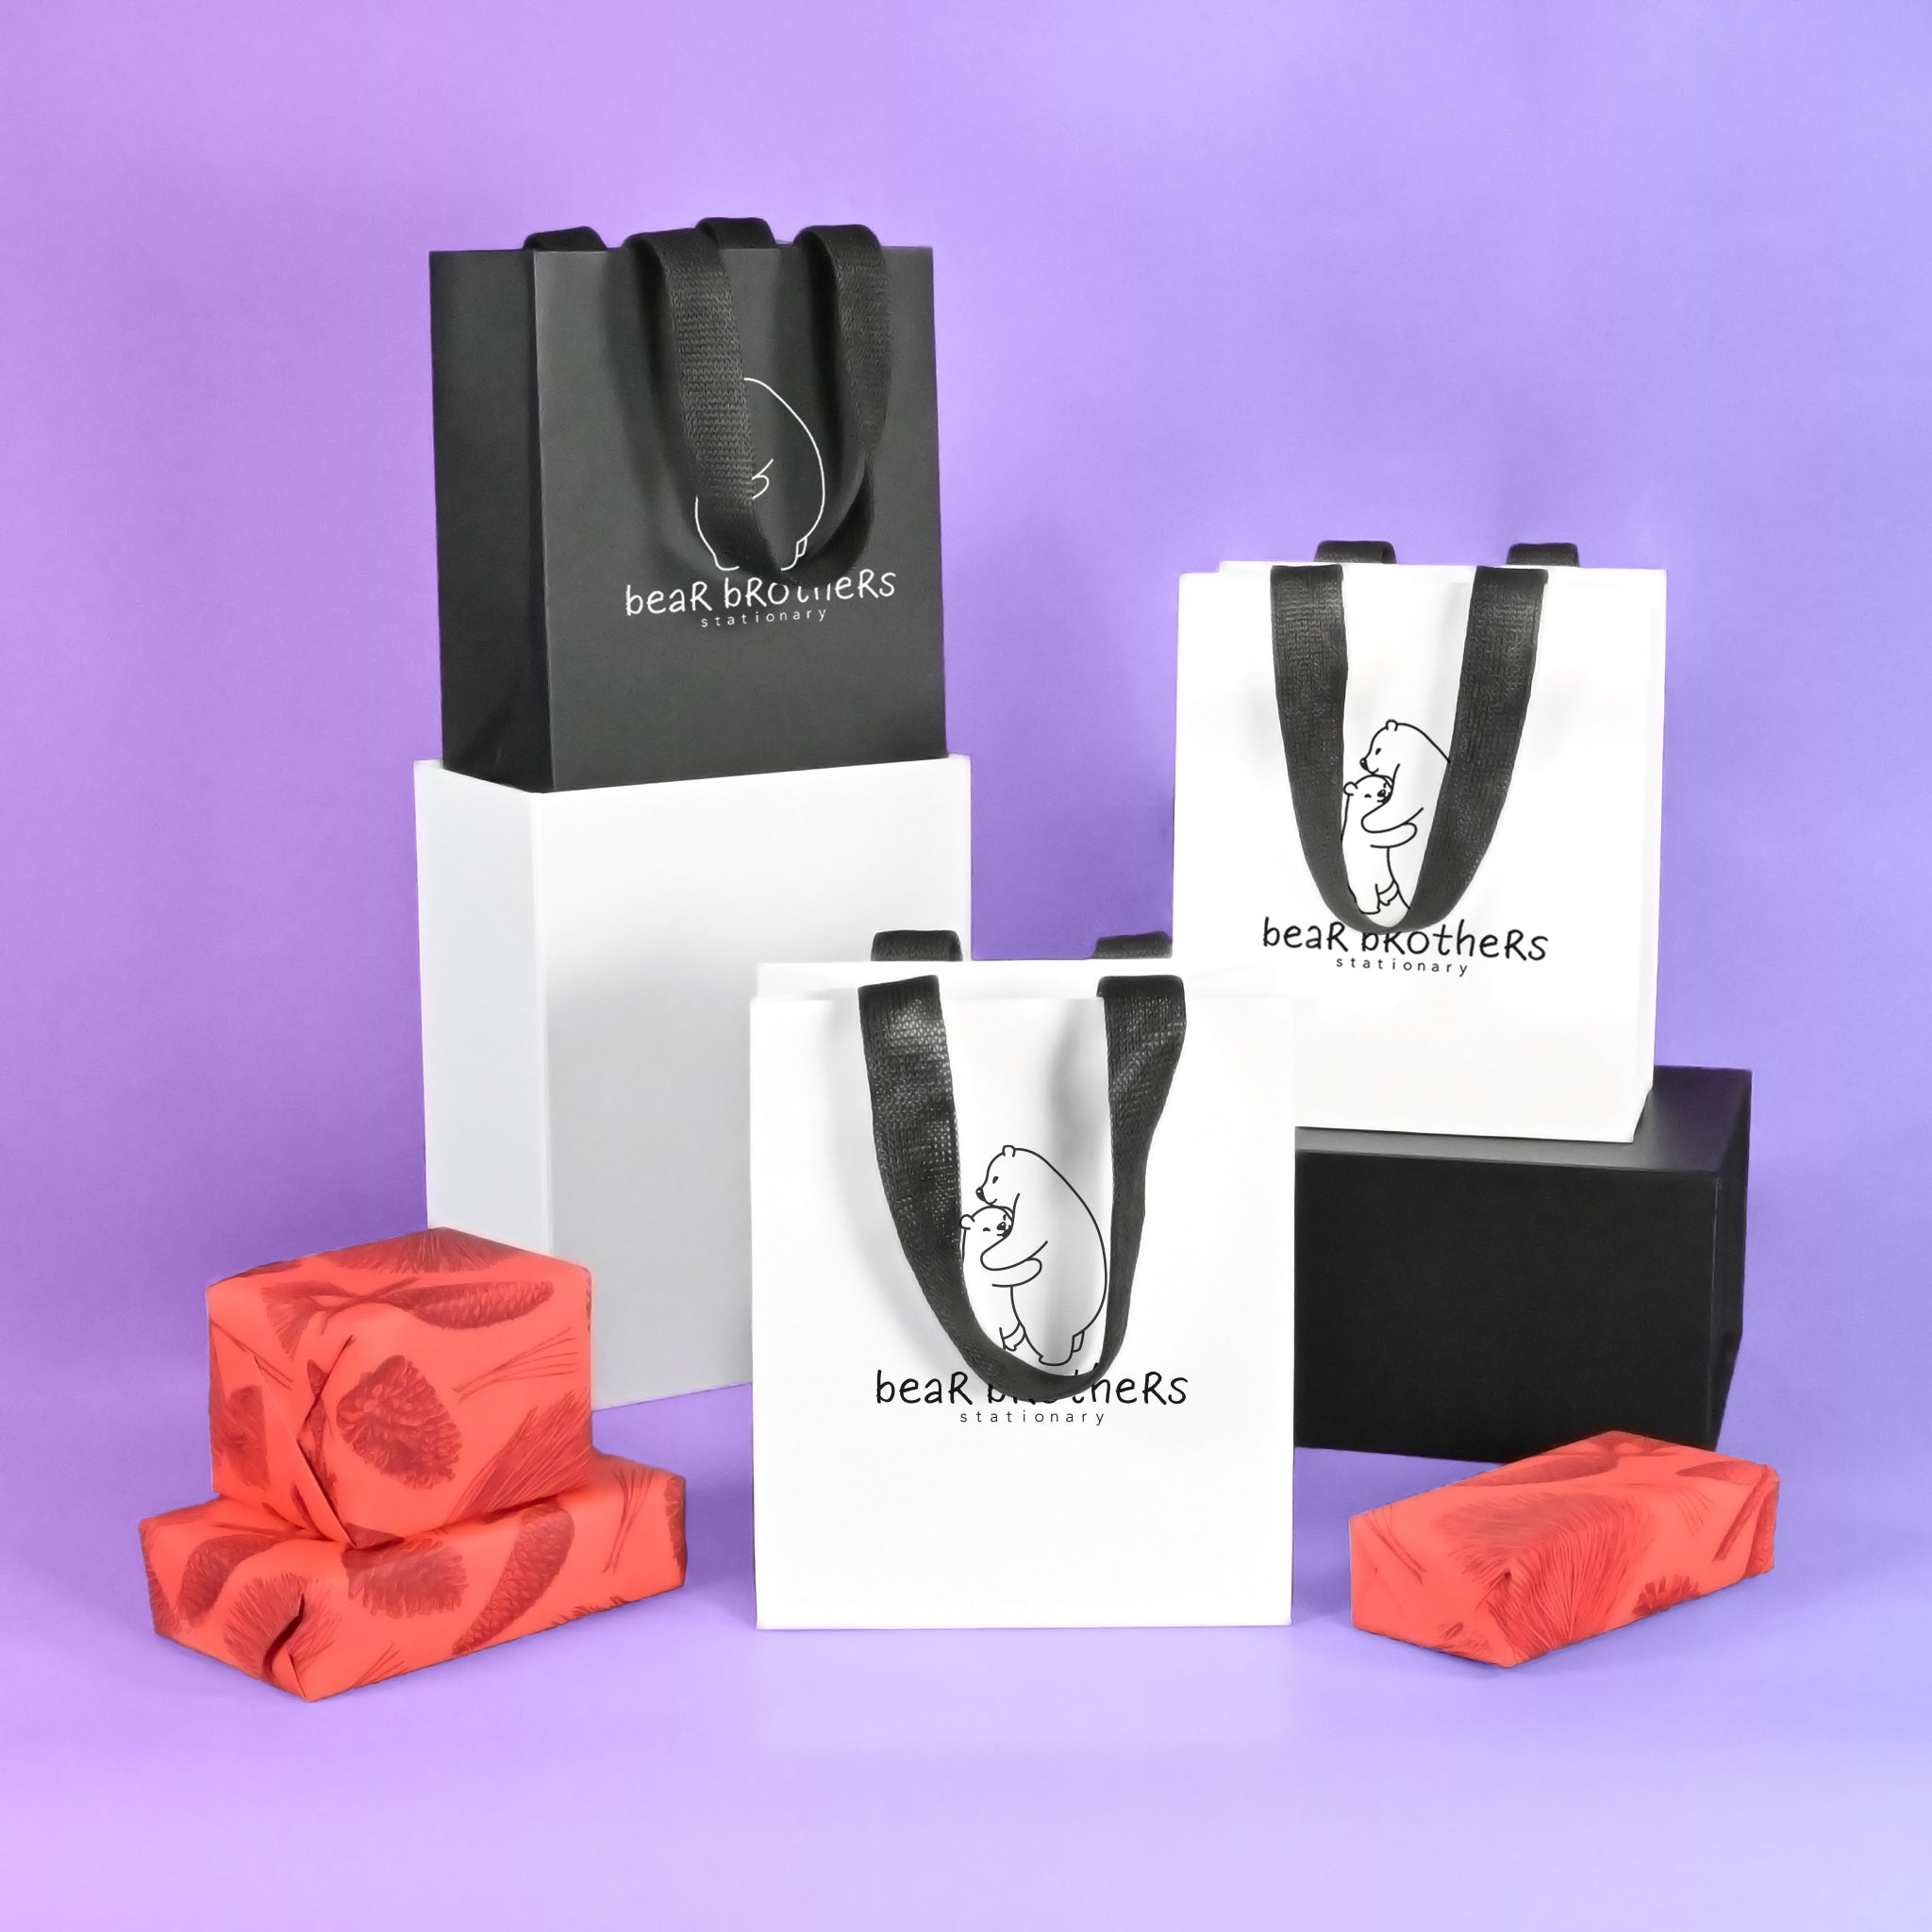 Sydney's Custom Packaging: Improve Your Brand with Boxes & Bags